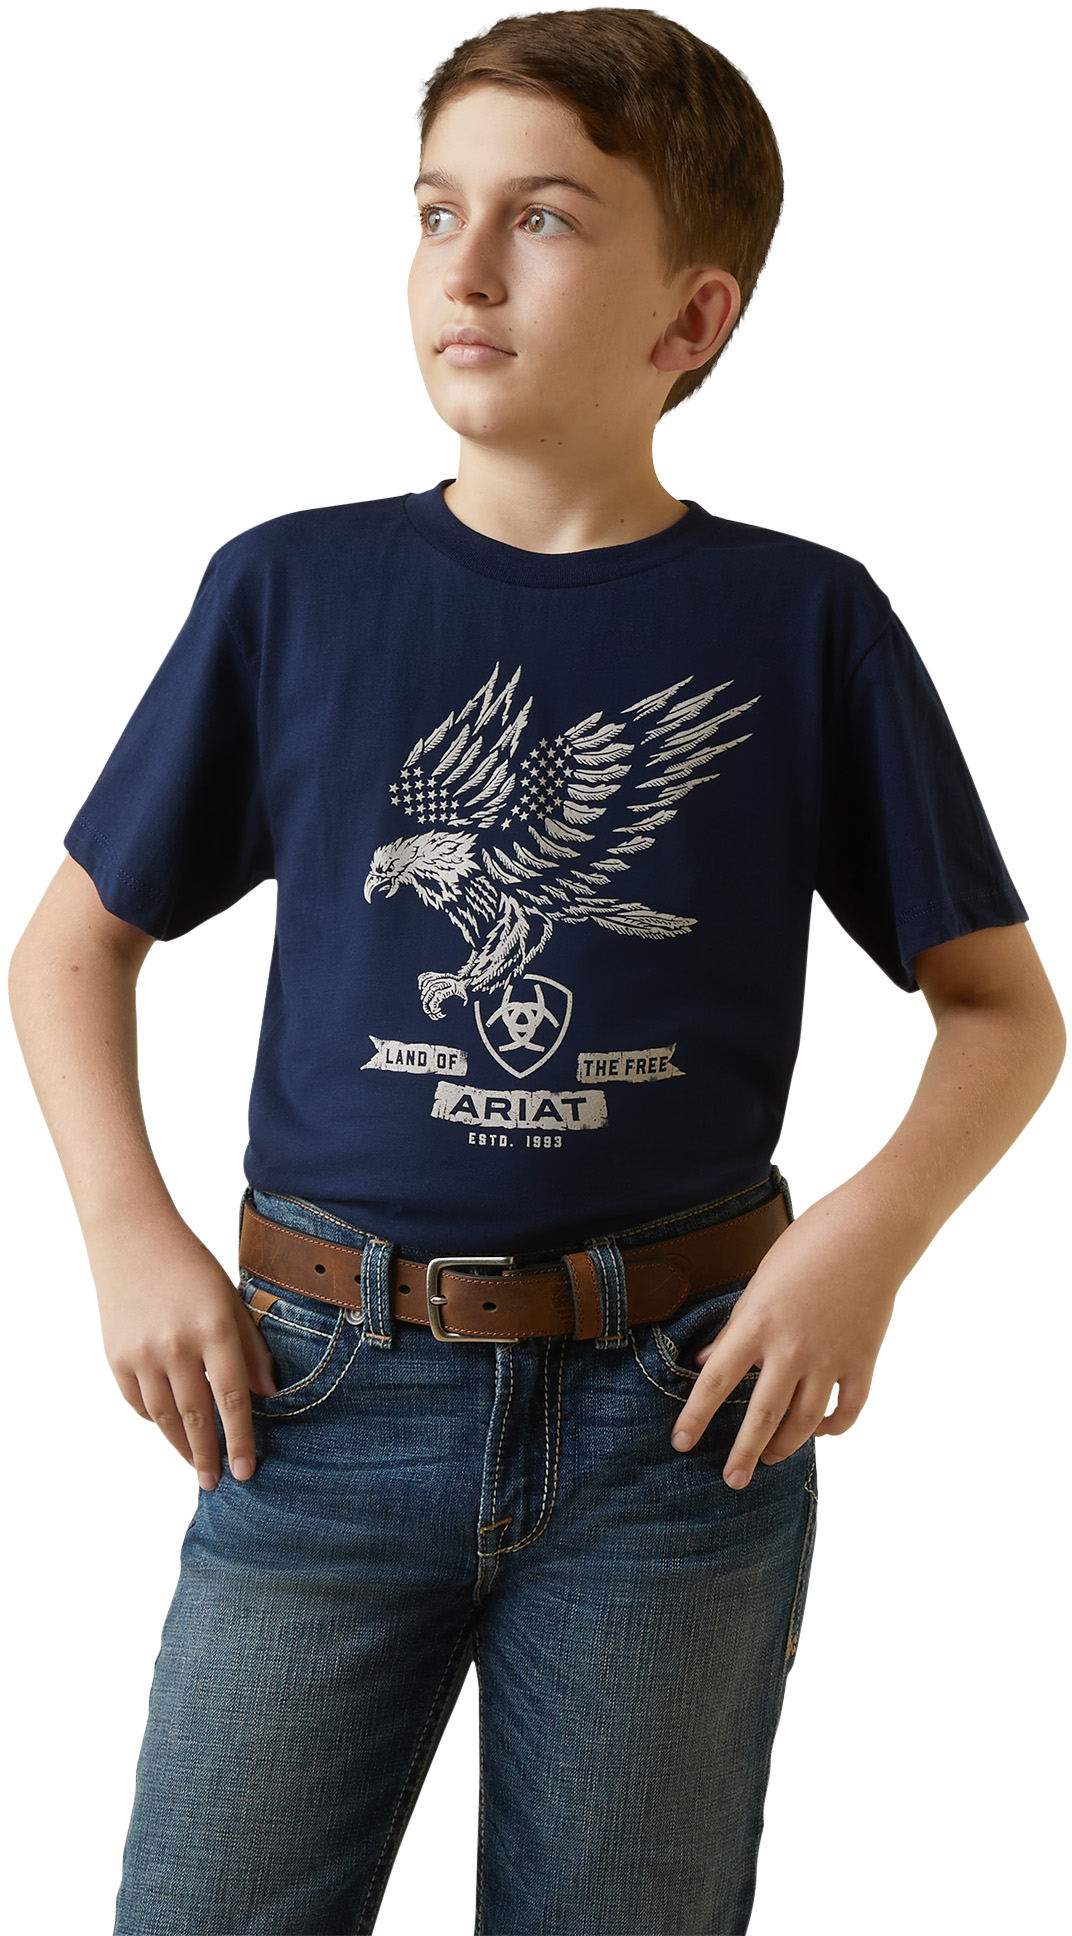 Ariat Fighting Eagle Short-Sleeve T-Shirt for Kids